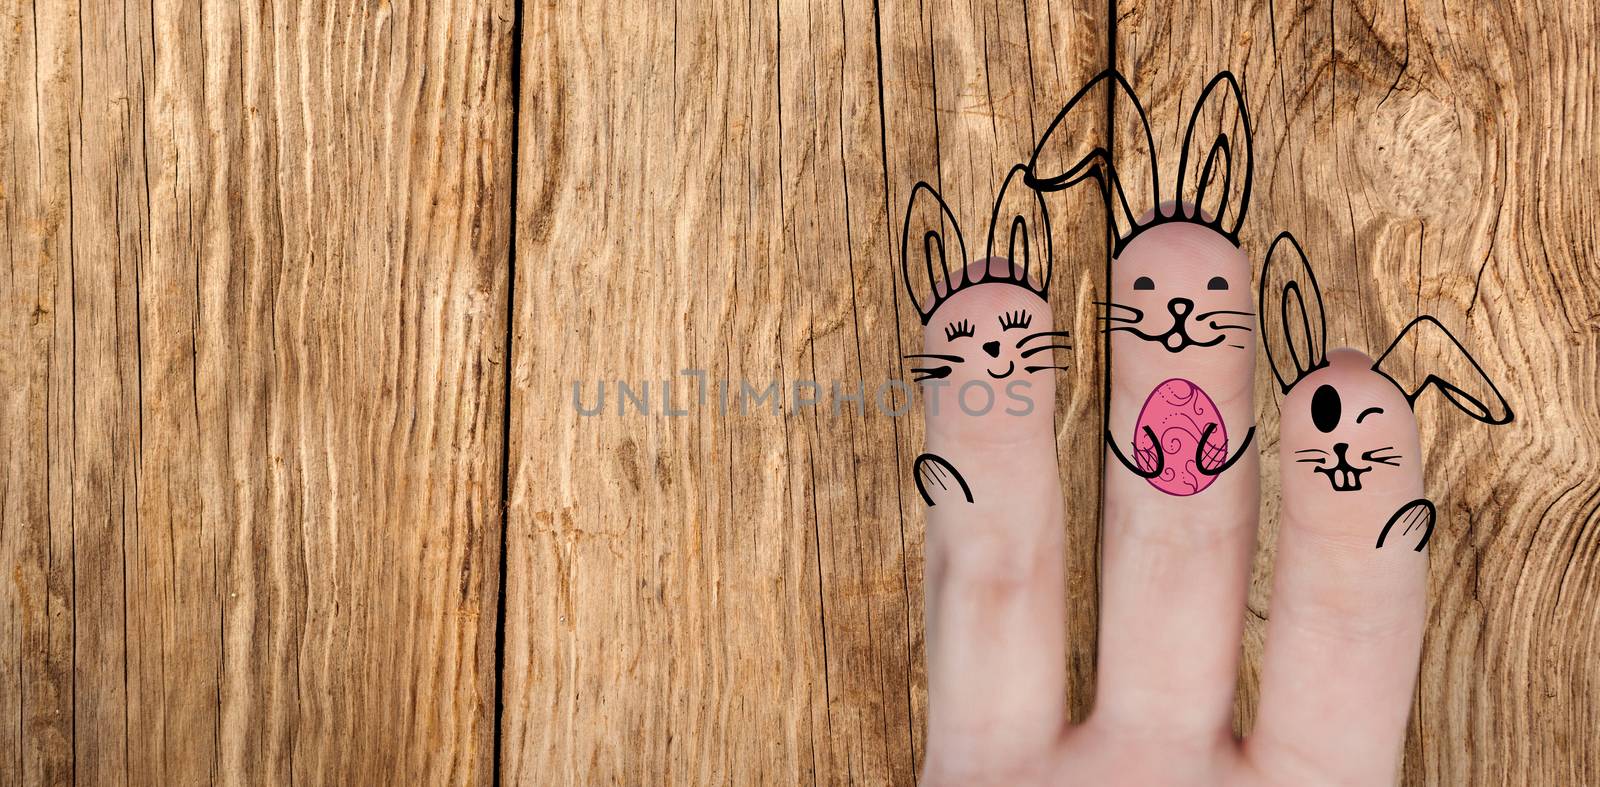 Composite image of vector image of fingers painted as easter bunny  by Wavebreakmedia